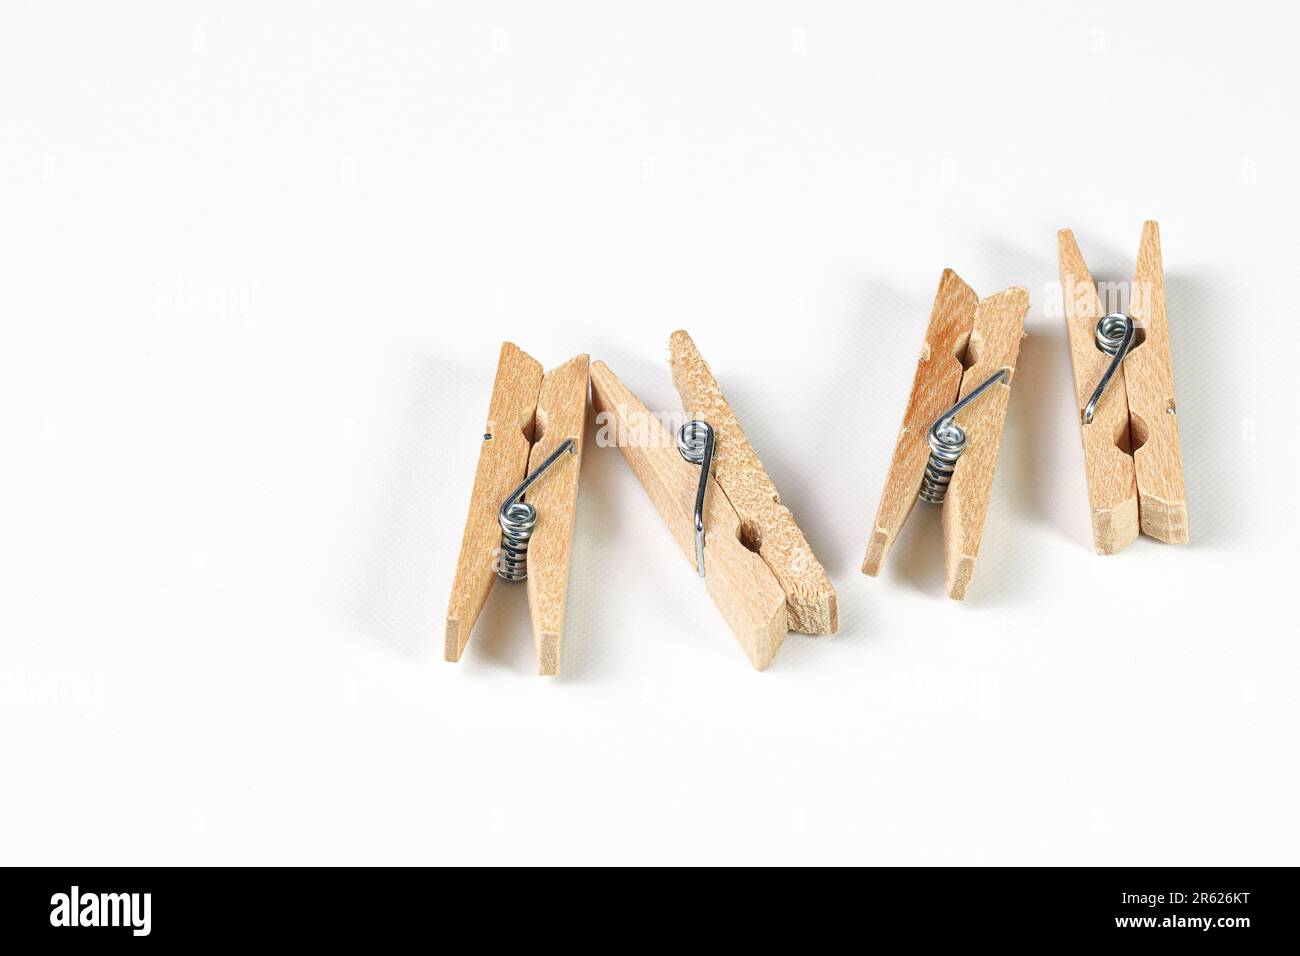 Concept image of tiny clothespins holding different color notes on  clothesline. Isolated on white background Stock Photo - Alamy